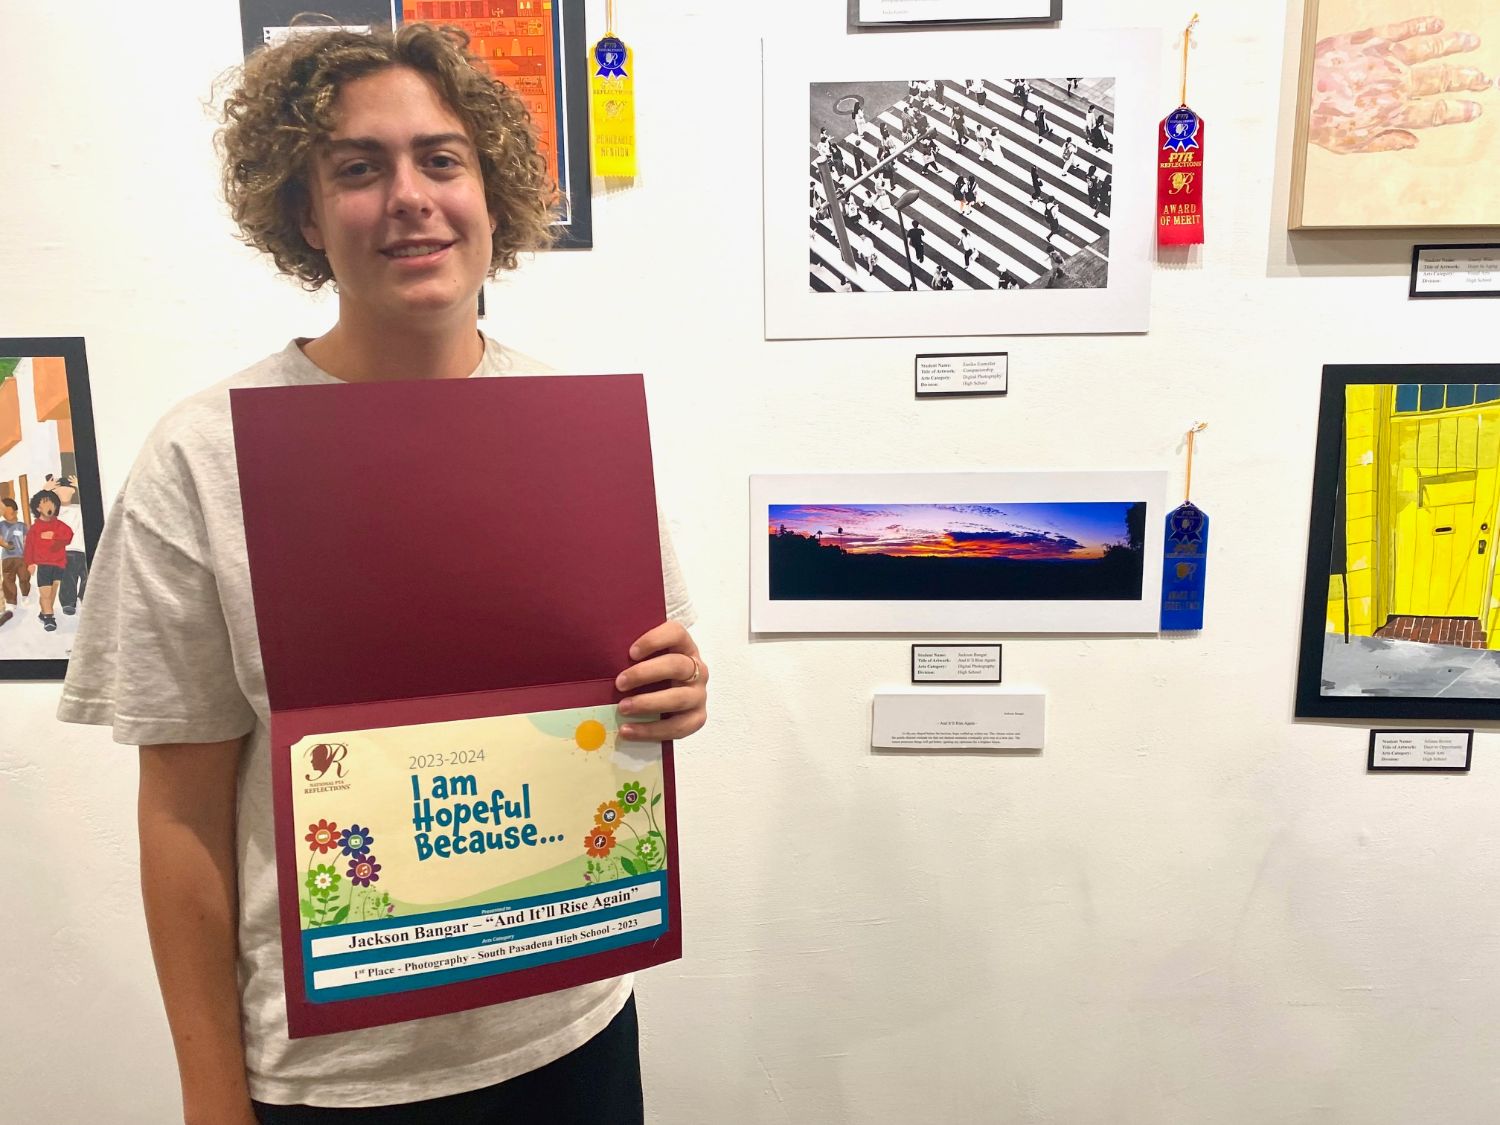 PHOTO: Alisa Hayashida | The South Pasadenan | Jackson Banger wins 1st place in the digital photography category of the 2023 PTSA Reflections exhibit at SPARC Gallery.